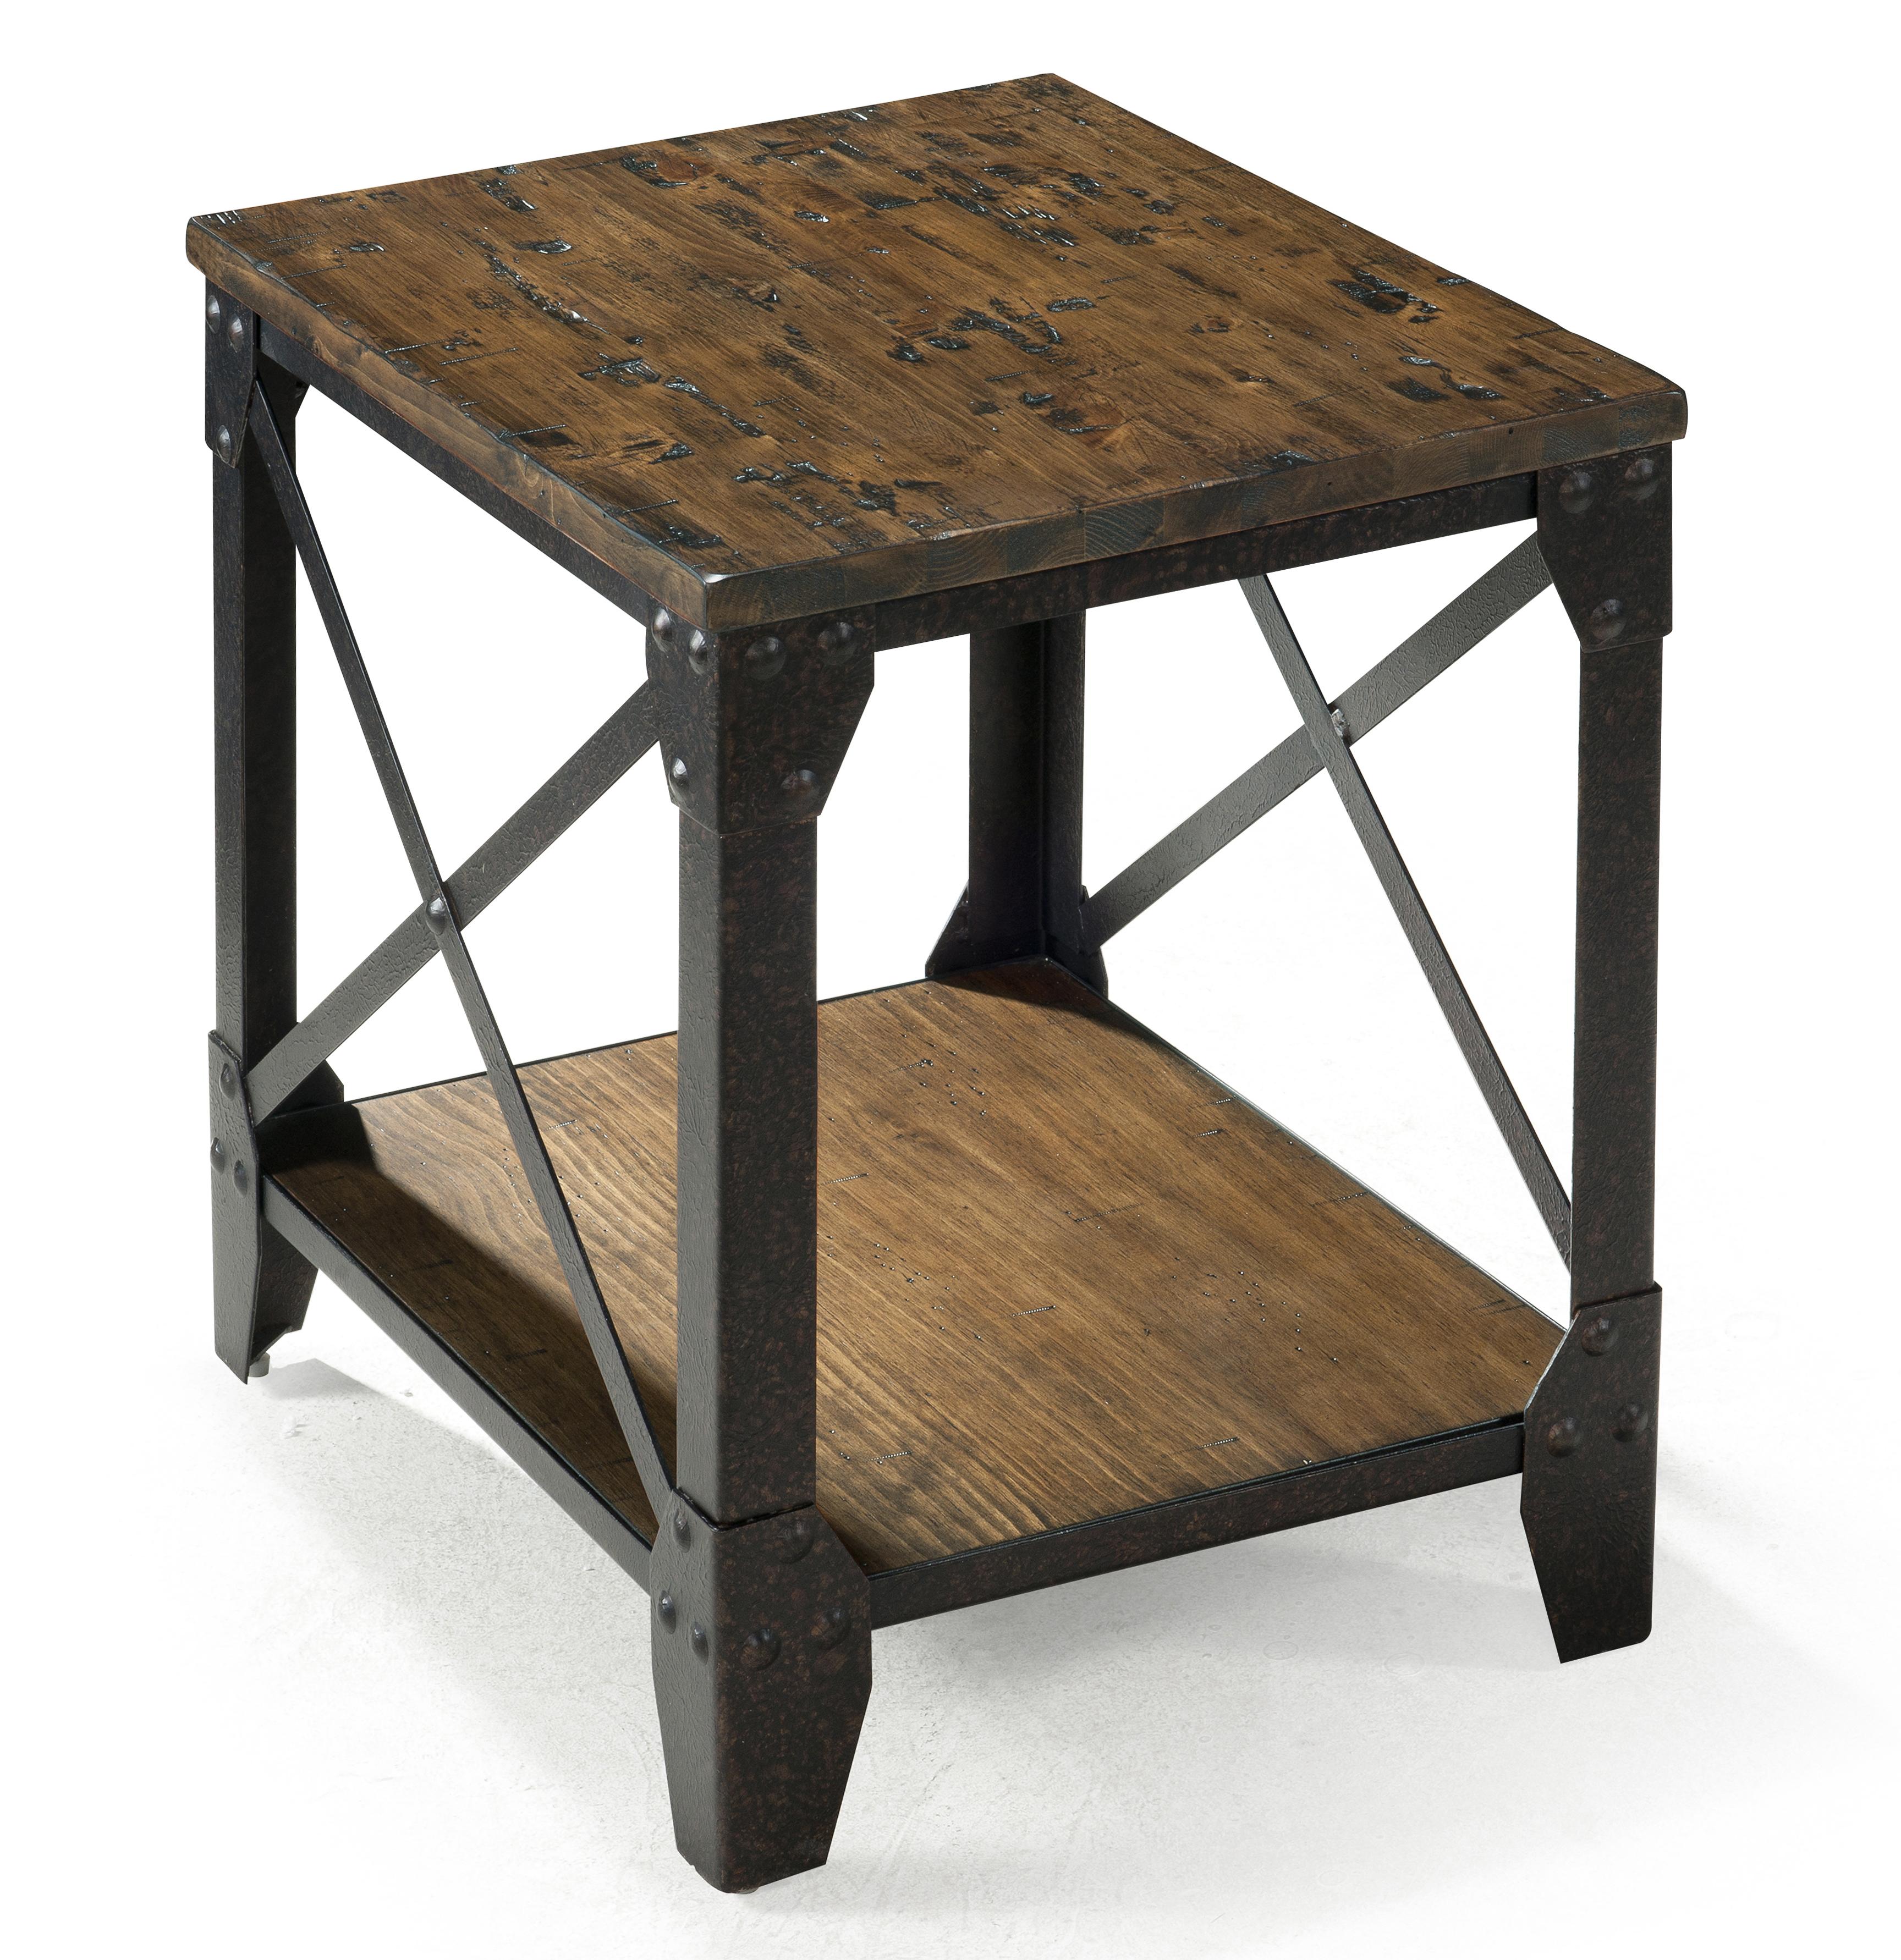 small rectangular end table with rustic iron legs magnussen home products color pinebrook accent long narrow bronze and glass side grey round tablecloth target project outdoor